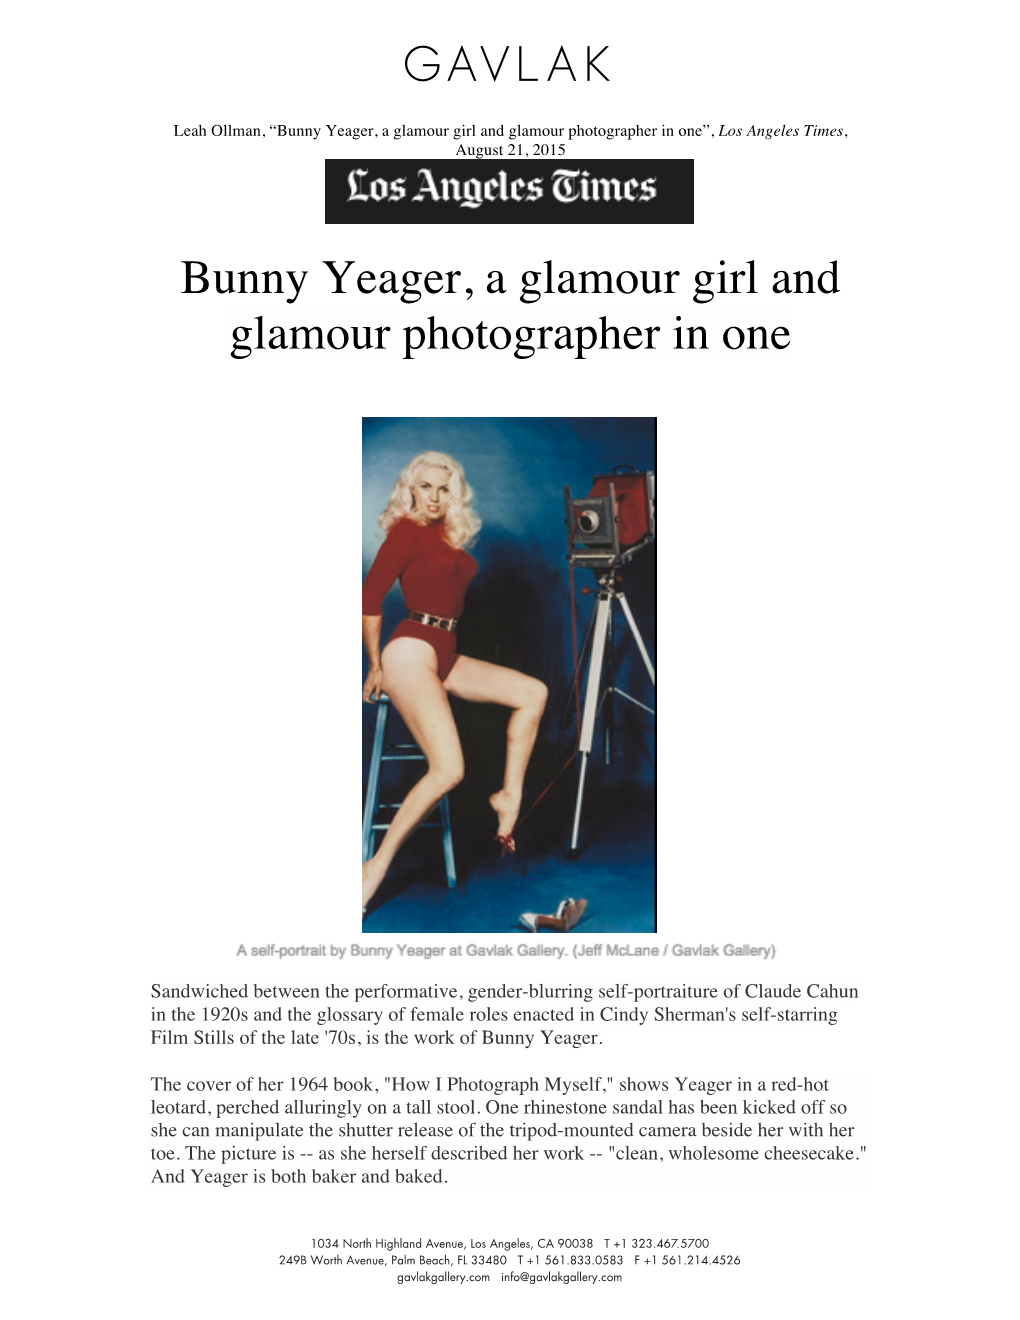 Bunny Yeager, a Glamour Girl and Glamour Photographer in One”, Los Angeles Times, August 21, 2015